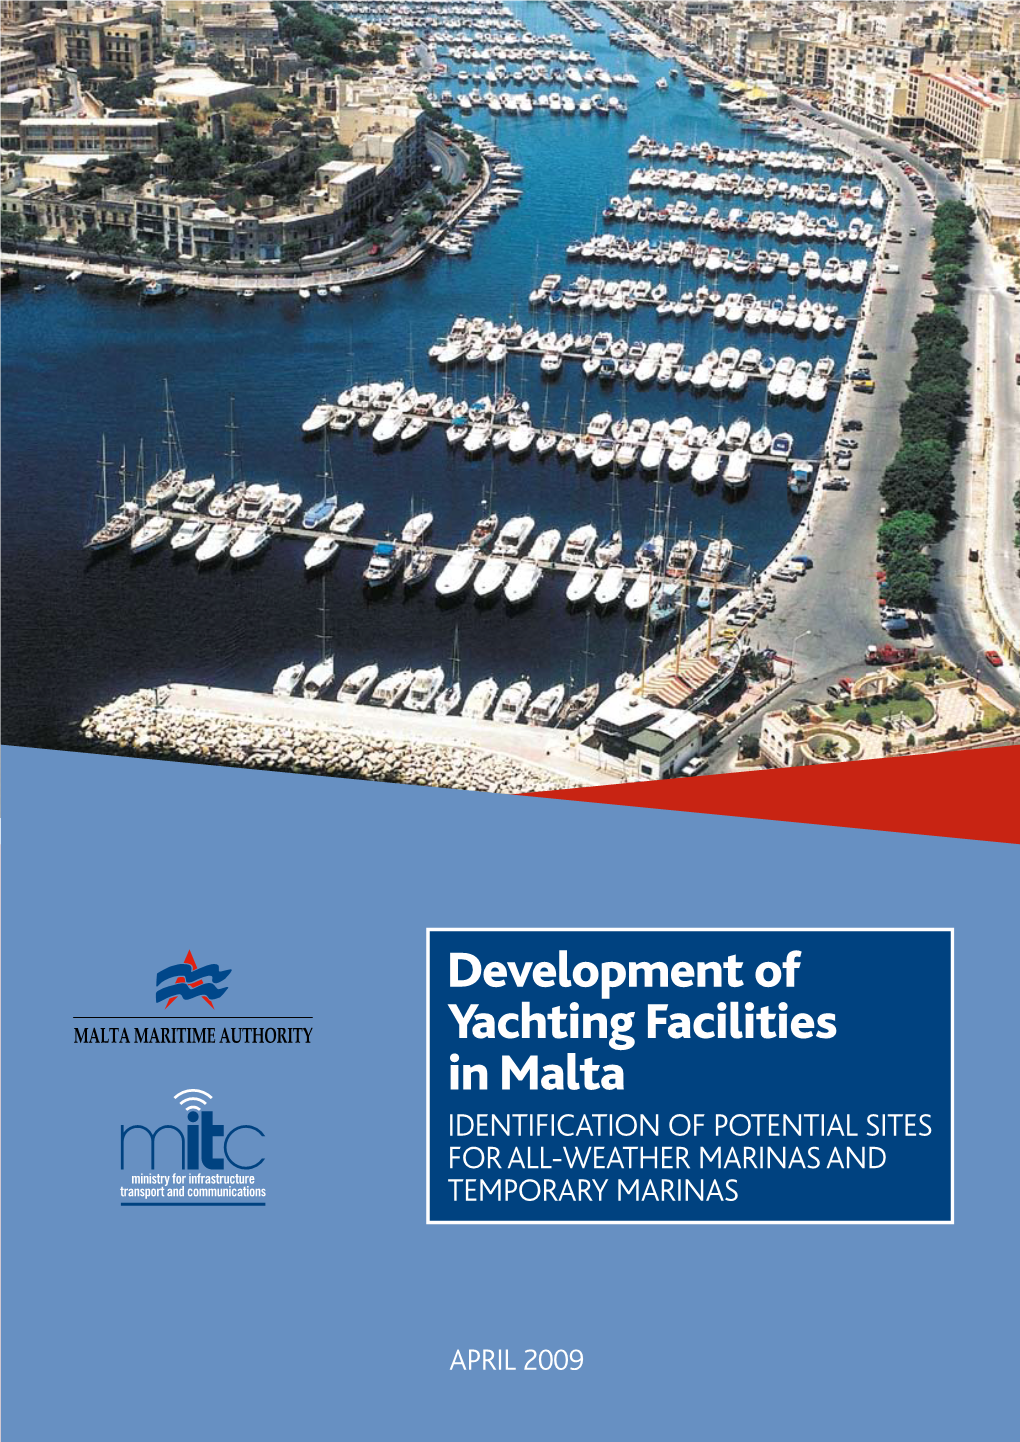 Development of Yachting Facilities in Malta Identification of Potential Sites for All-Weather Marinas and Temporary Marinas